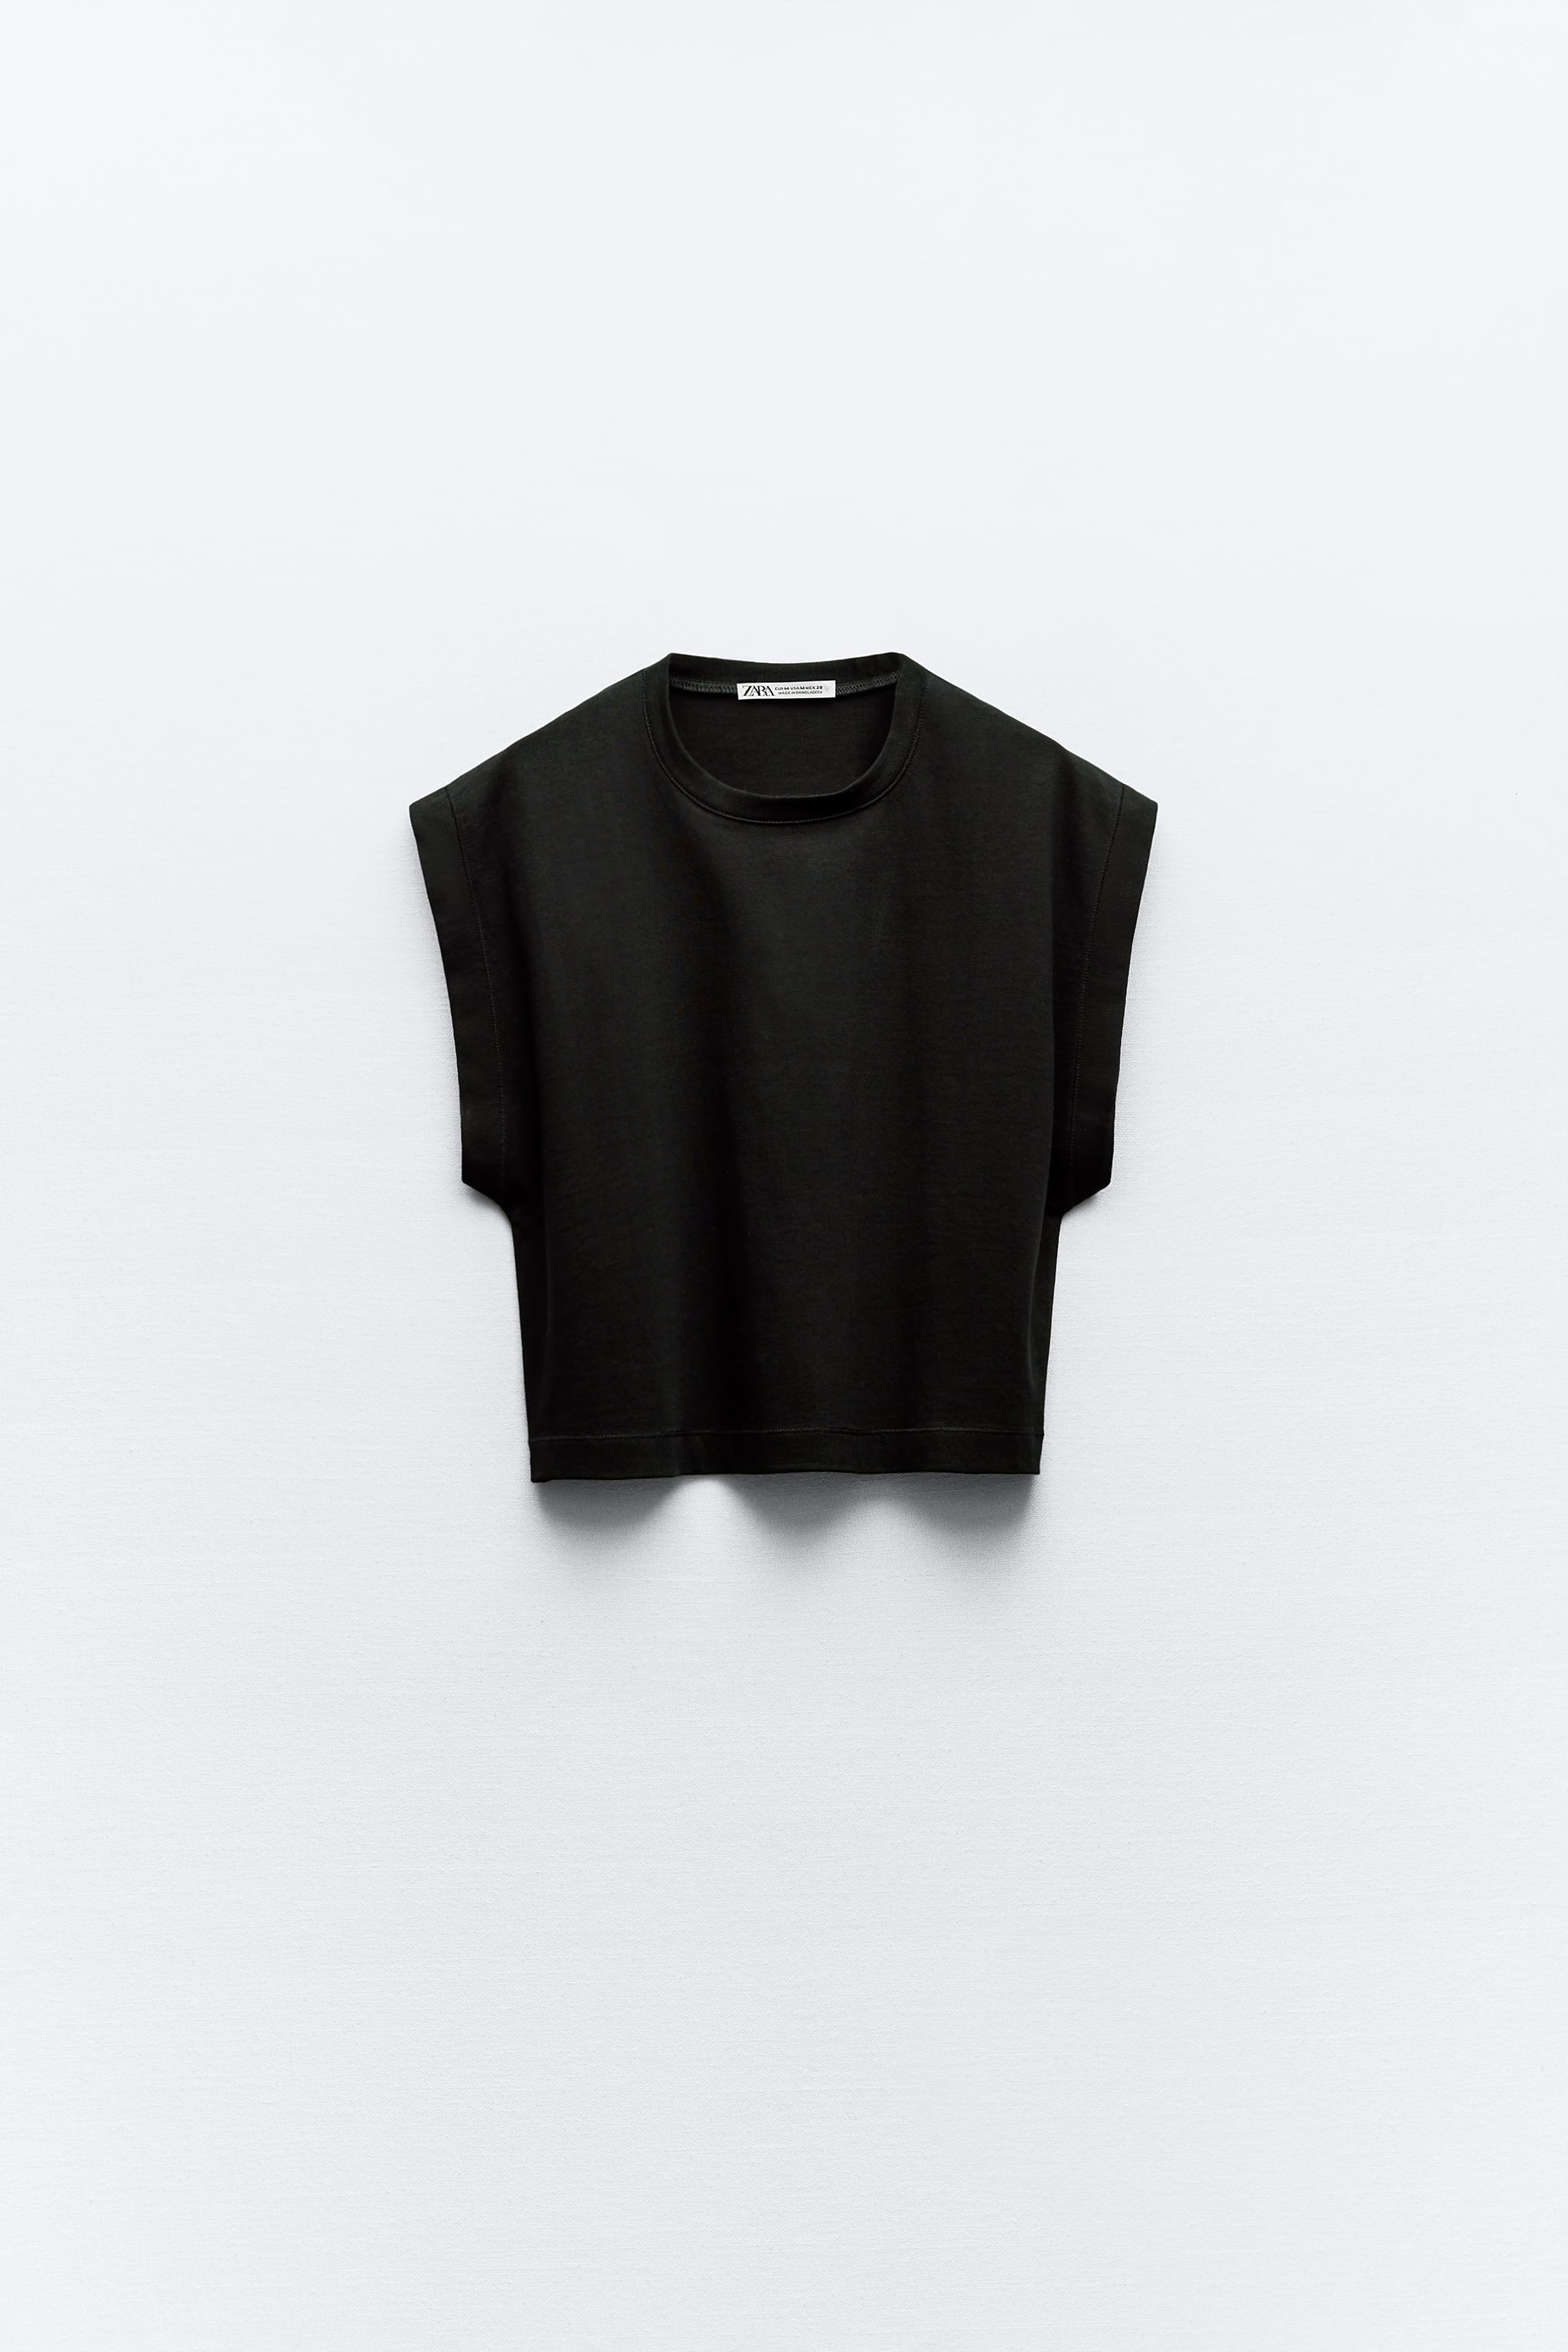 WASHED EFFECT HEAVY COTTON T-SHIRT